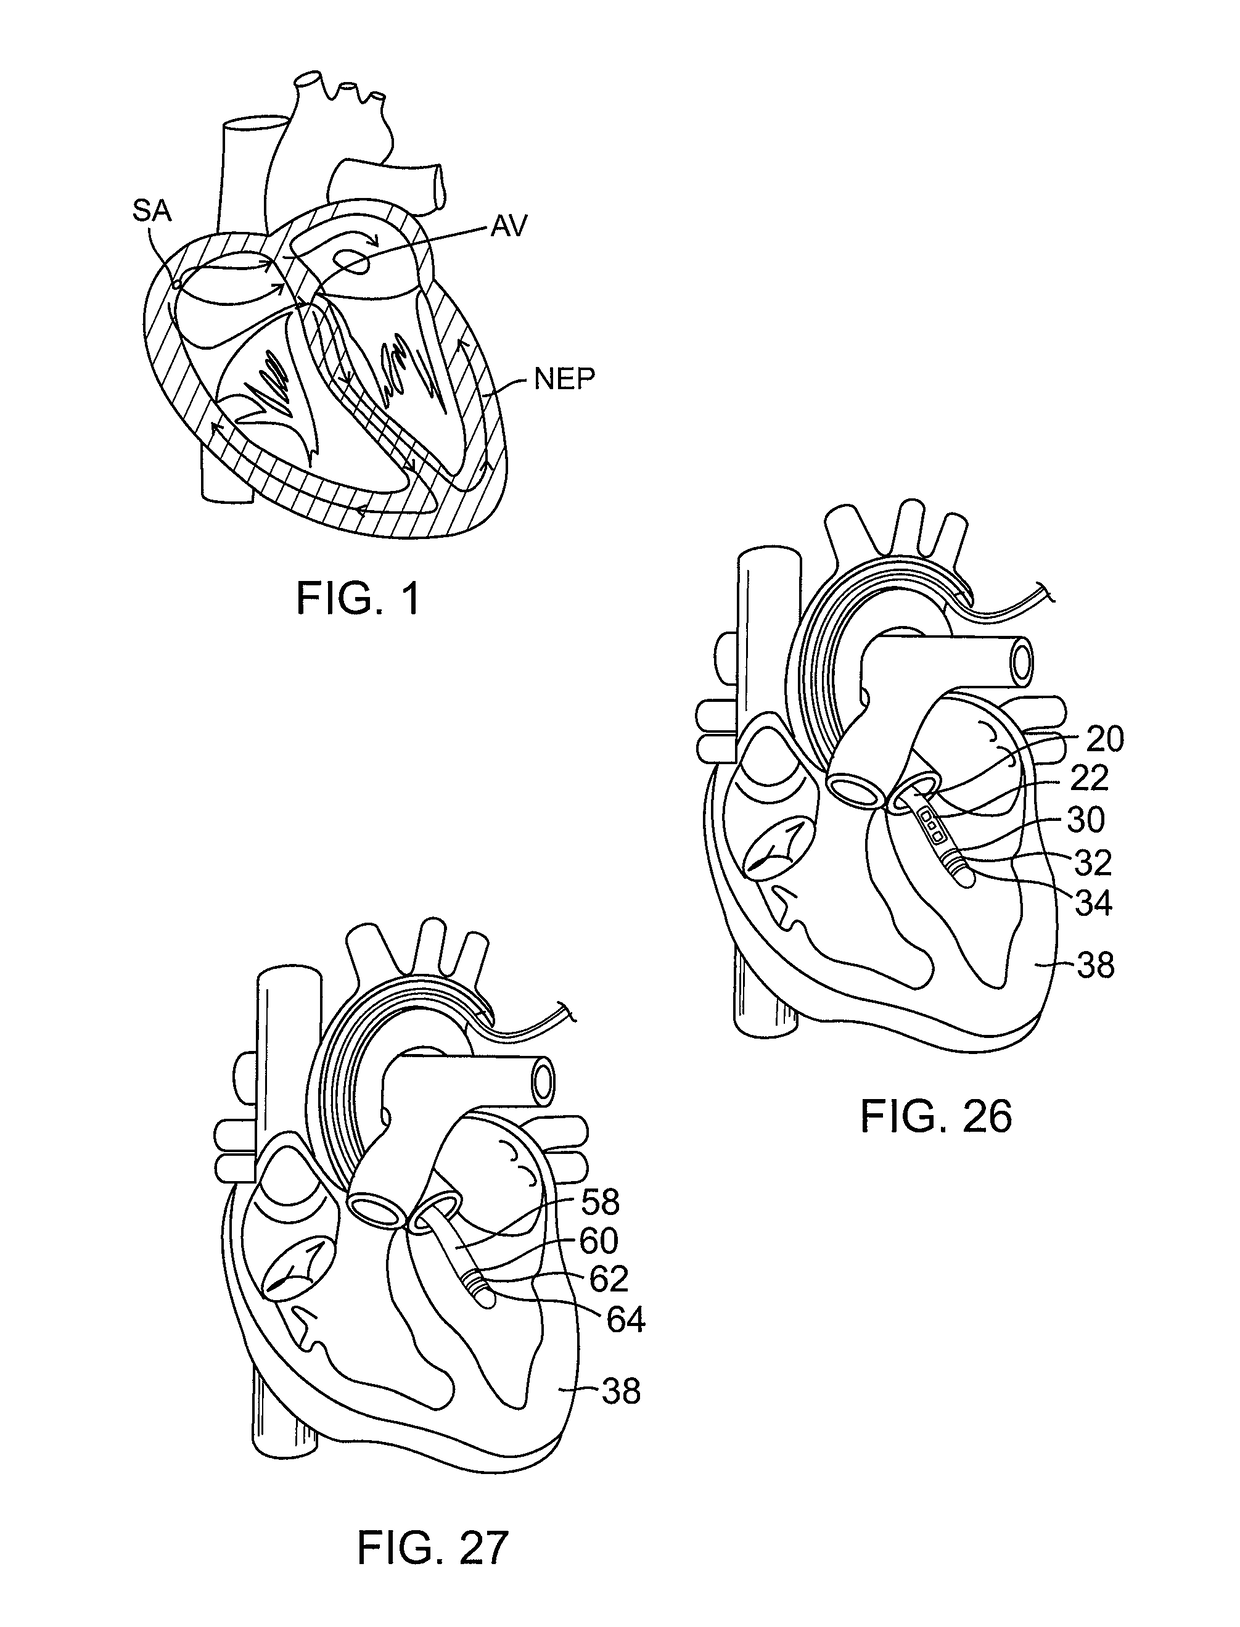 System and method for visualizing electrophysiology data